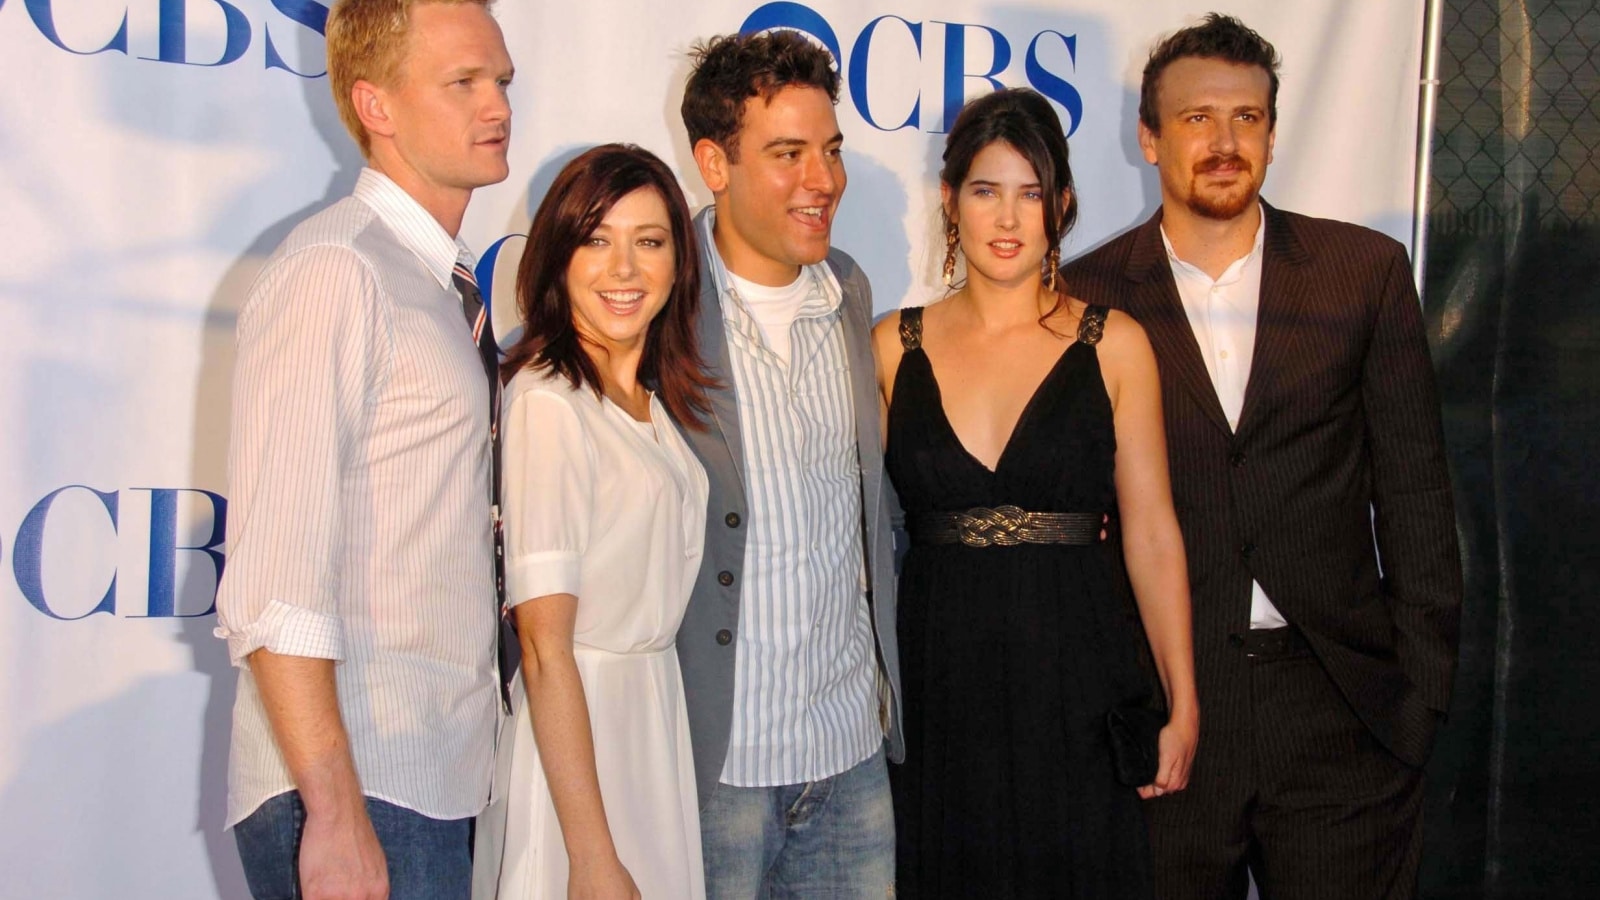 PASADENA - JULY 15: Cast of "How I Met Your Mother" at CBS's TCA Press Tour at The Rose Bowl on July 15, 2006 in Pasadena, CA.